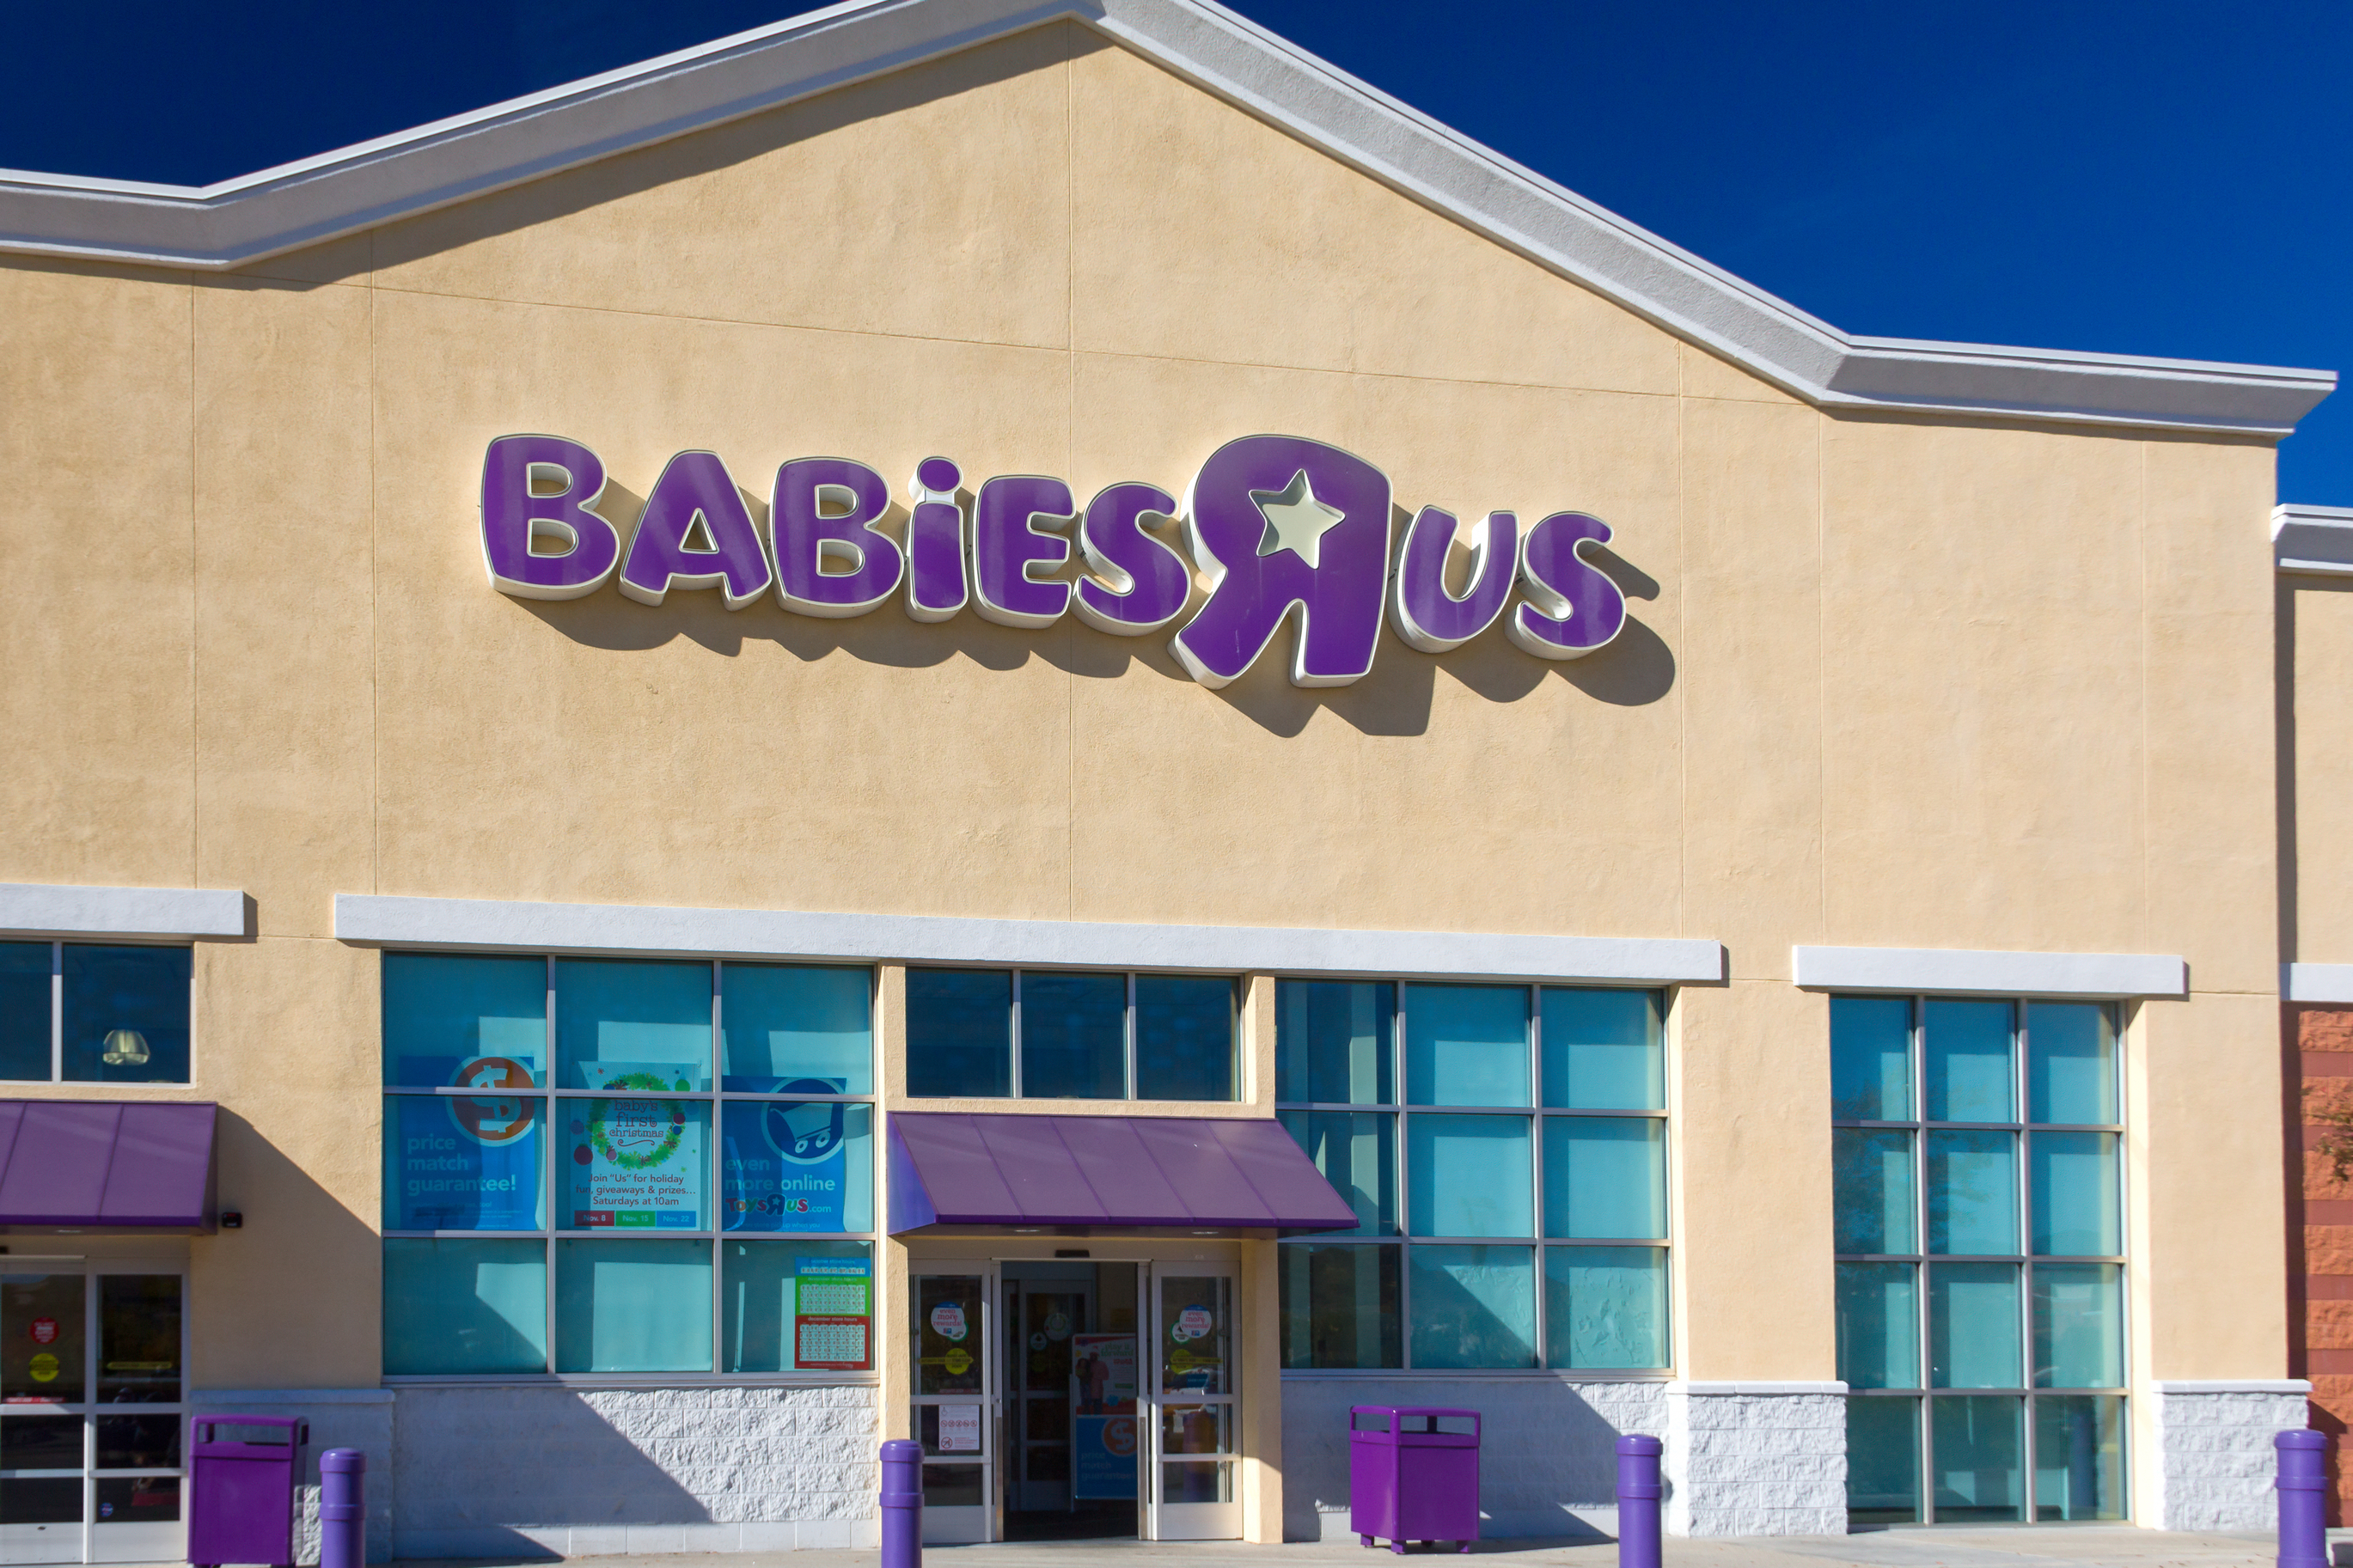 Save up to 30% off top baby items at Babies R Us